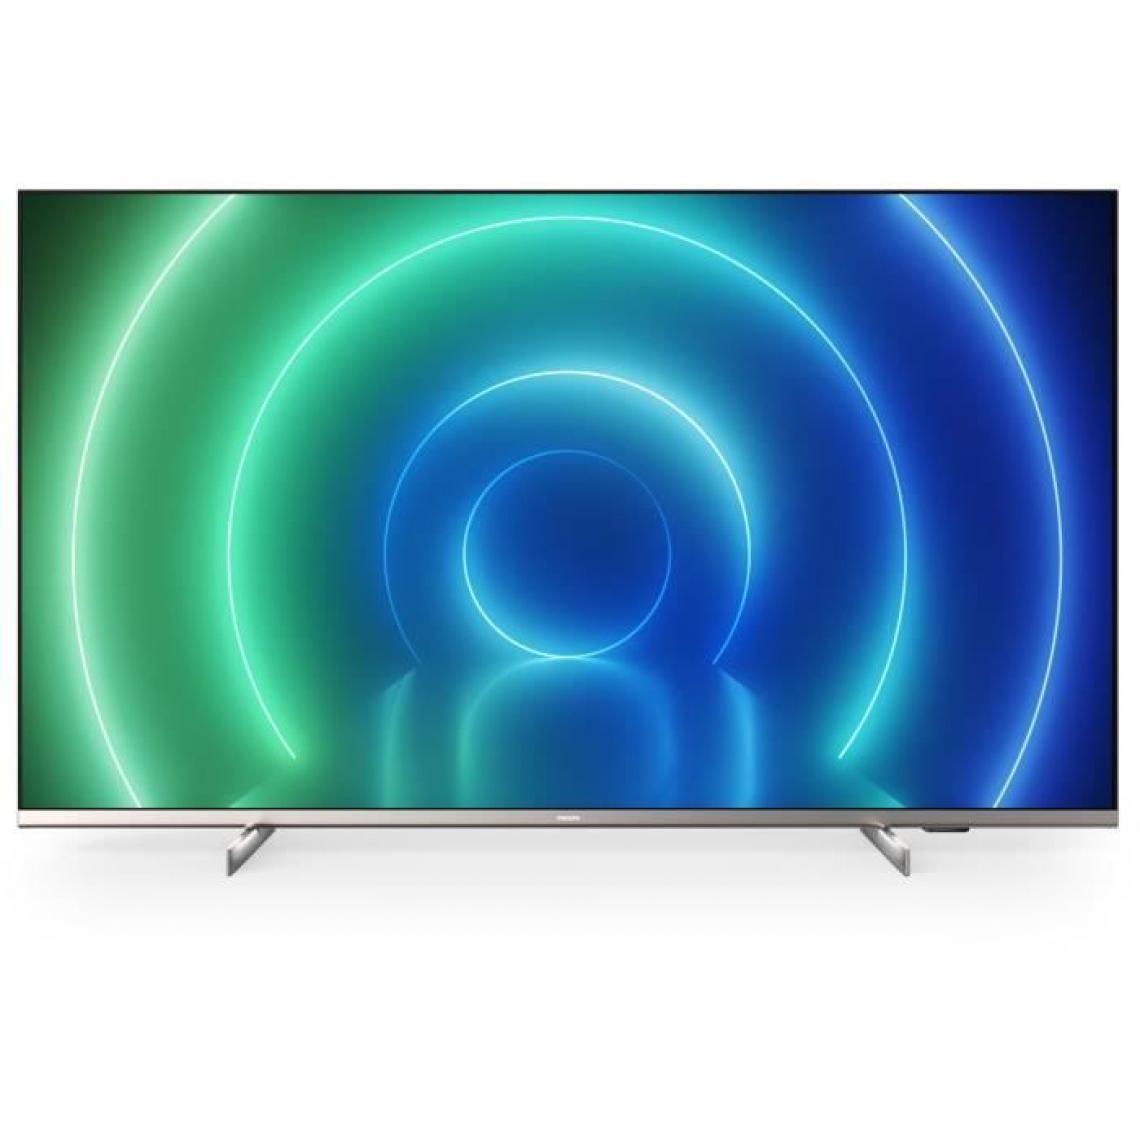 Philips - PHILIPS 55PUS7556 - TV LED UHD 4K - 55 (139cm) - Smart TV - Dolby Vision / son Dolby Atmos - 3 X HDMI (2 X HDMI VRR) - TV 50'' à 55''